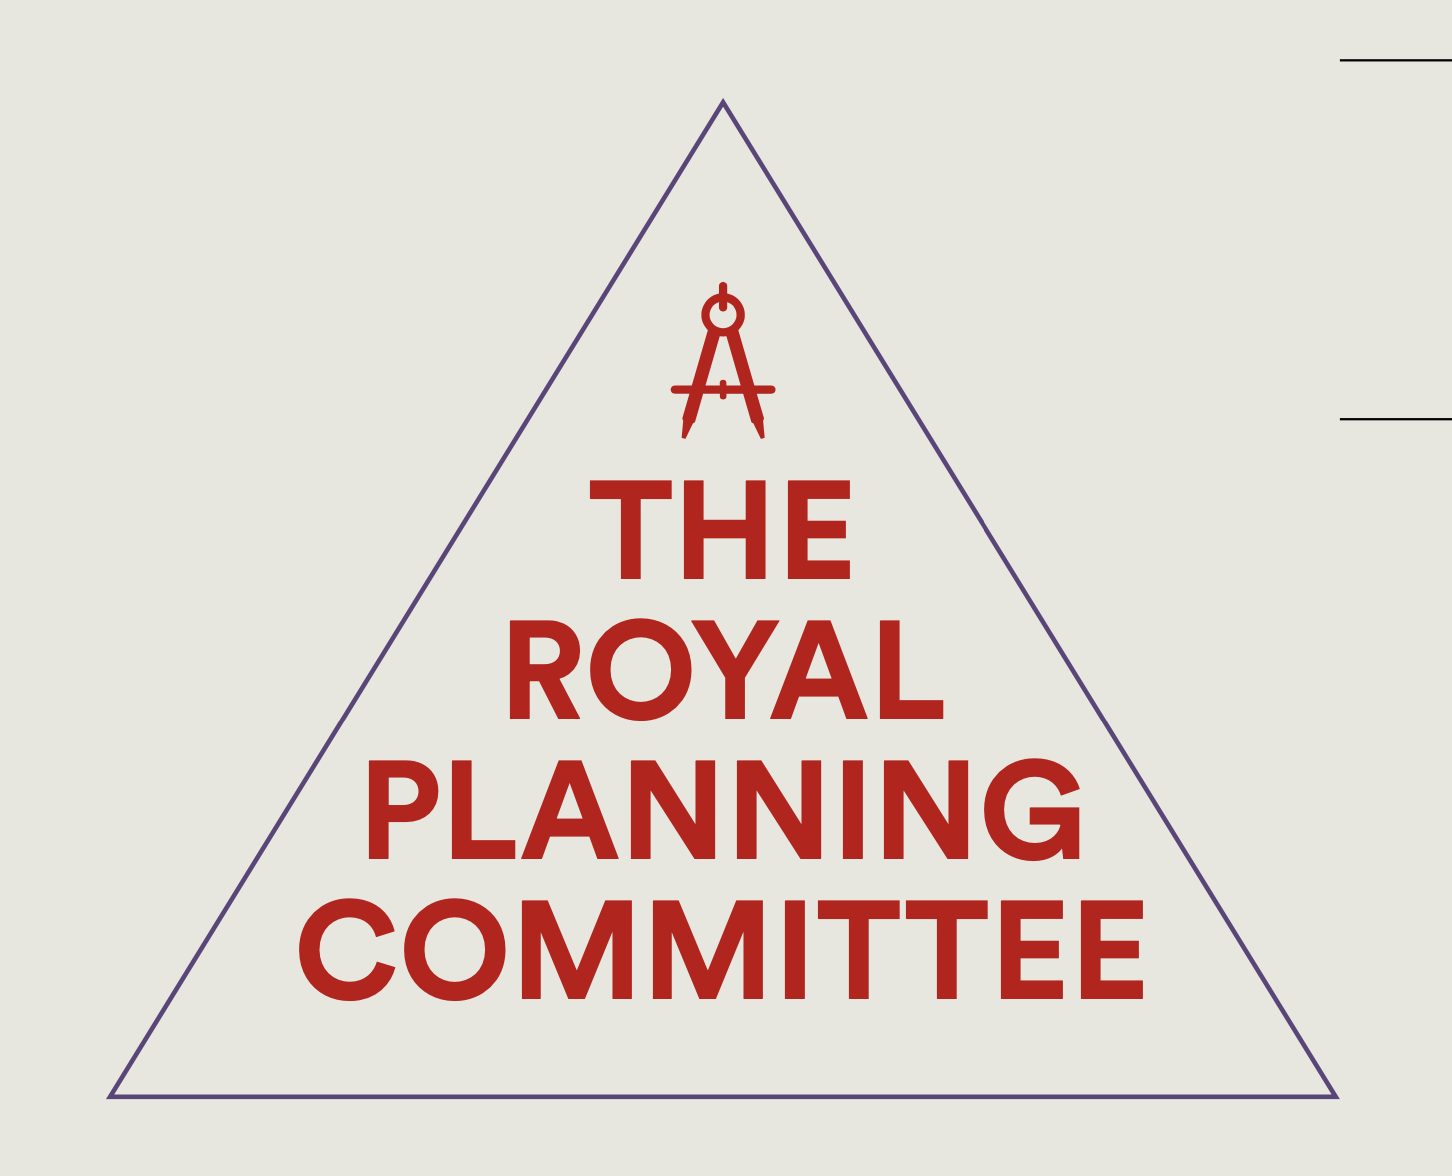 The Royal Planning Committee